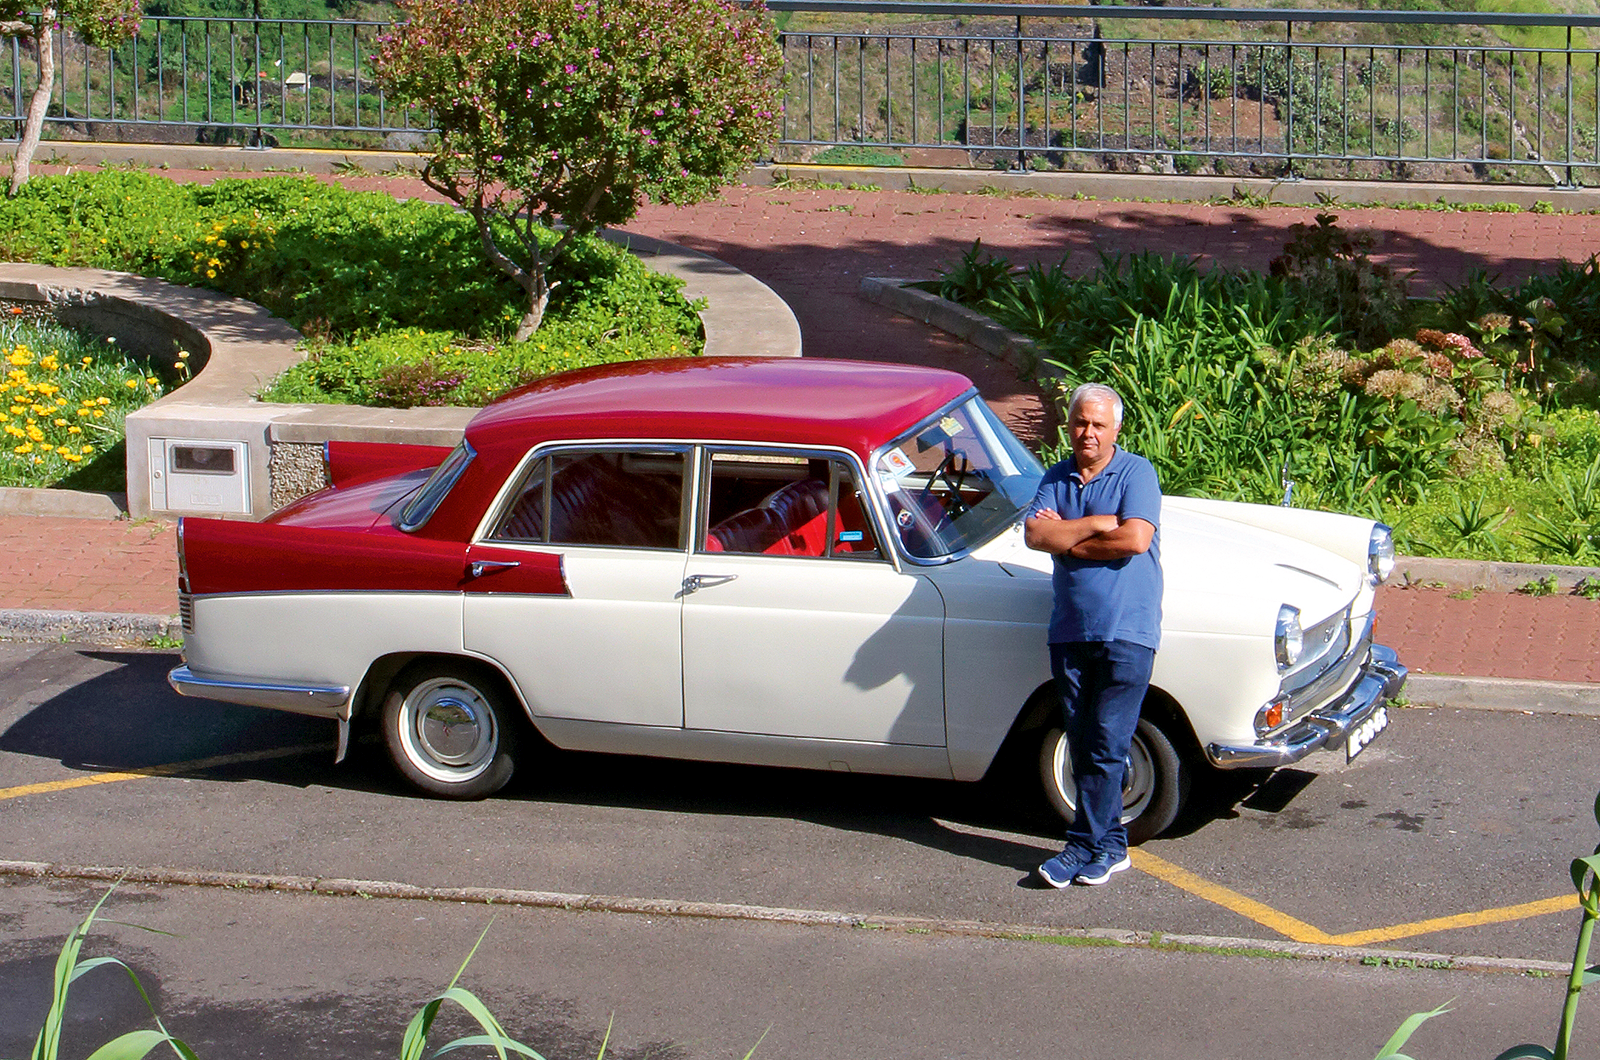 Classic & Sports Car – Discover the old-world charm of Madeira’s classic car scene